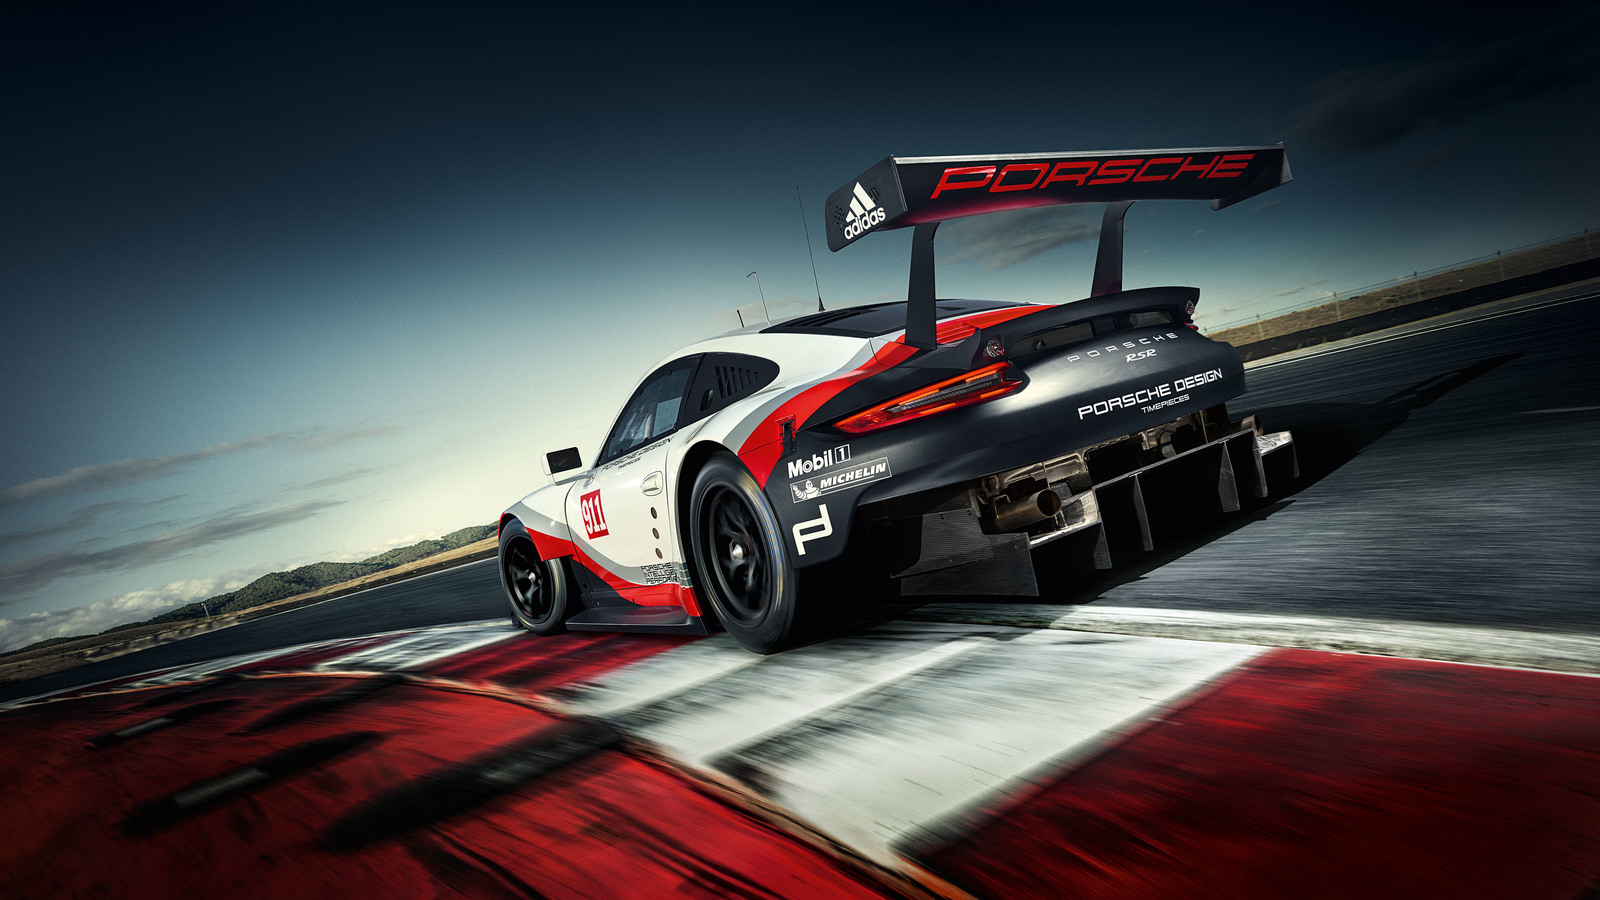 2017 Porsche 911 RSR racer adopts mid-engined layout - ForceGT.com